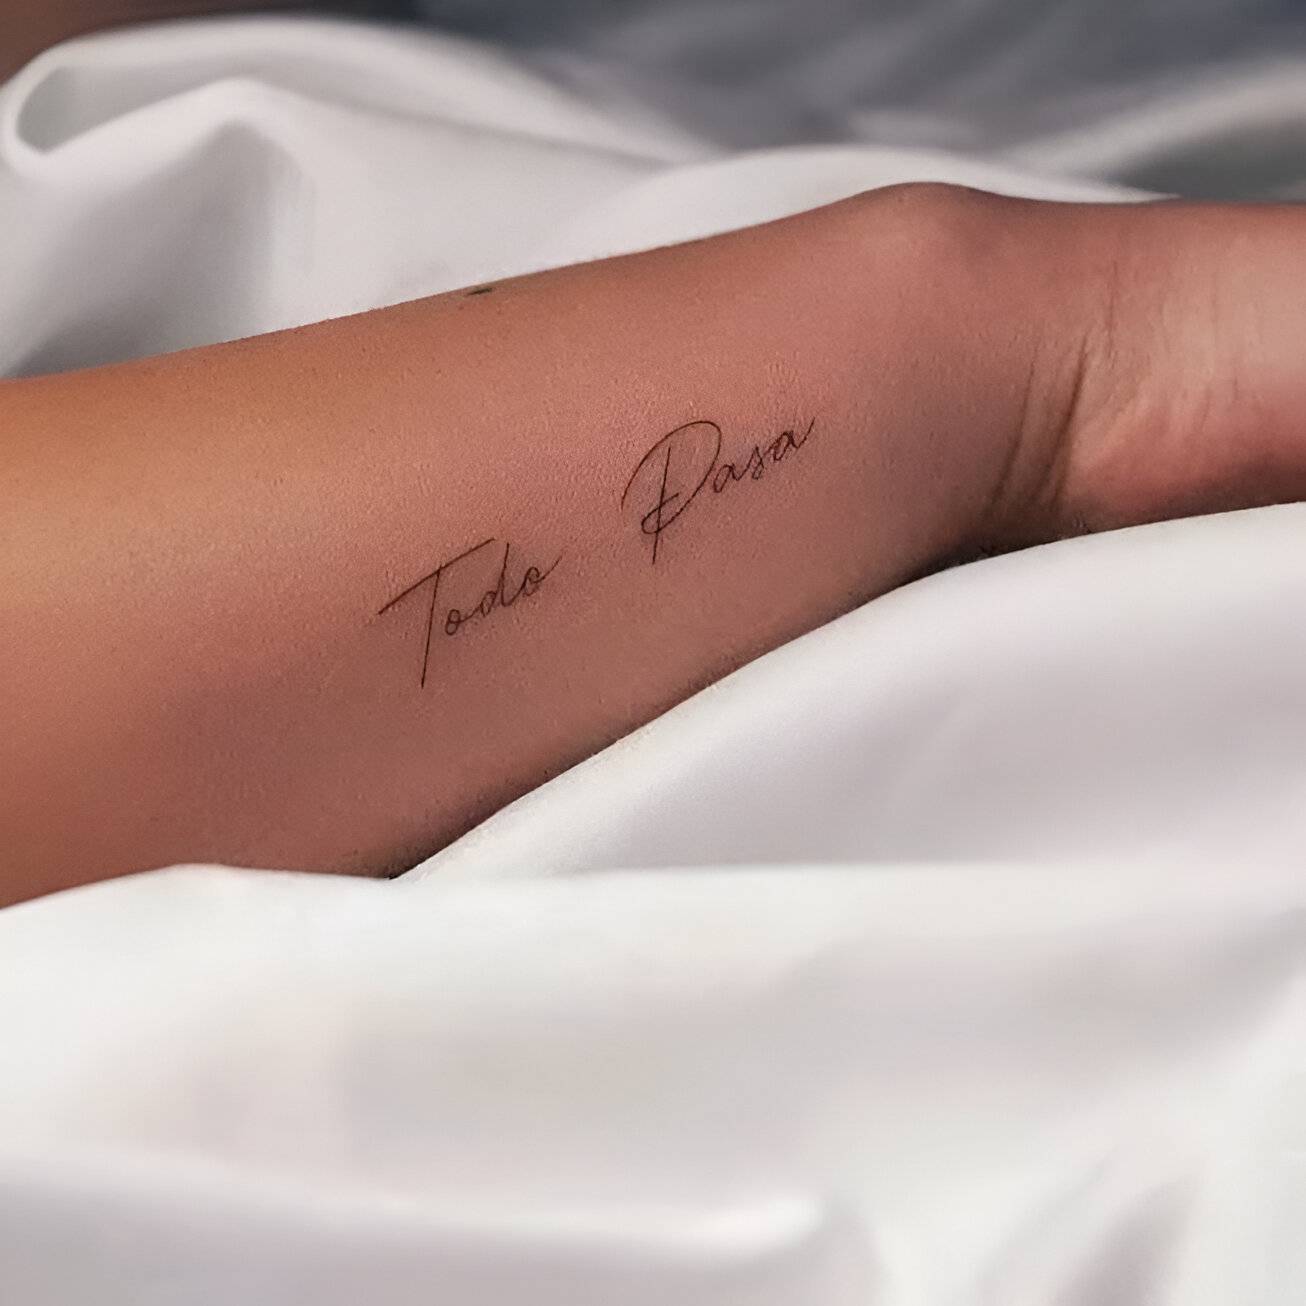 22 Meaningful Quote Tattoos To Bring Out Your Feminine Power - 185